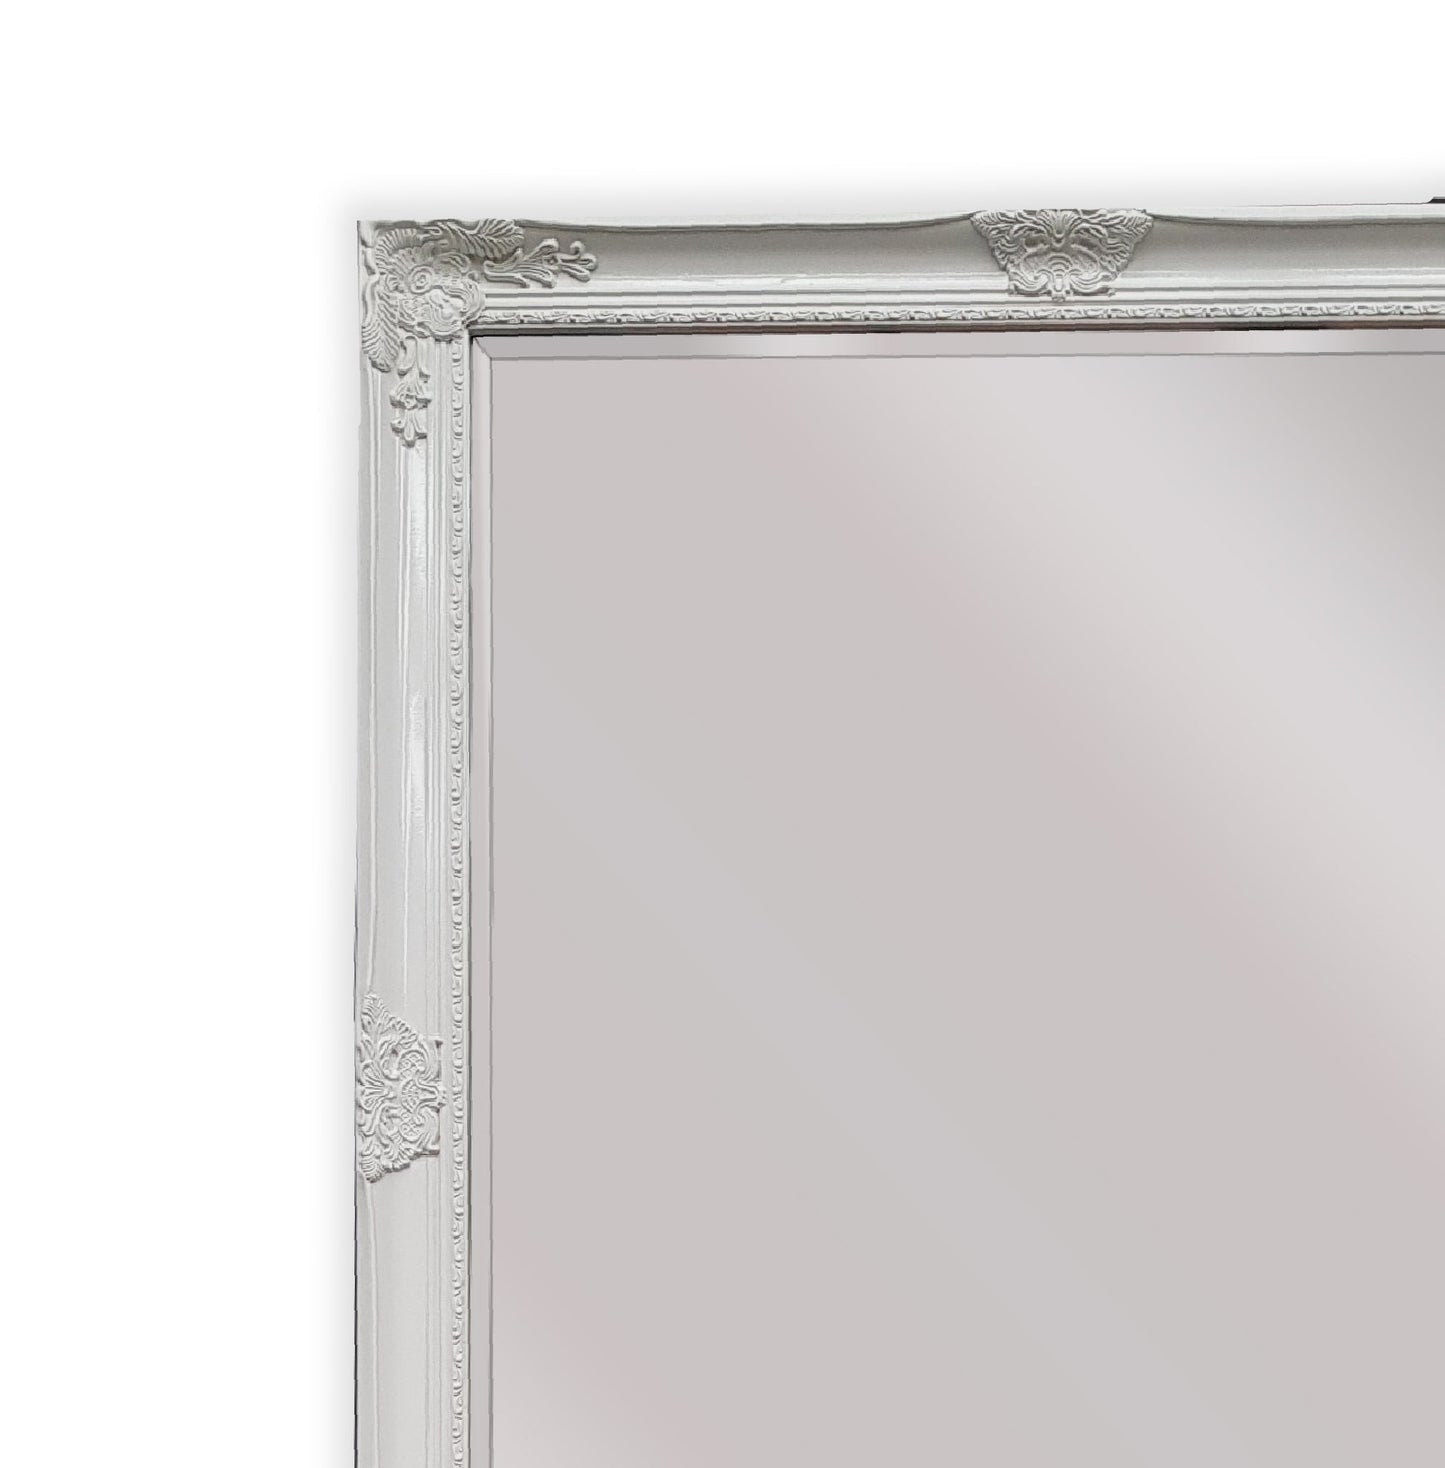 French Provincial Ornate Mirror - WHITE - X Large 100cm x 190cm - image2